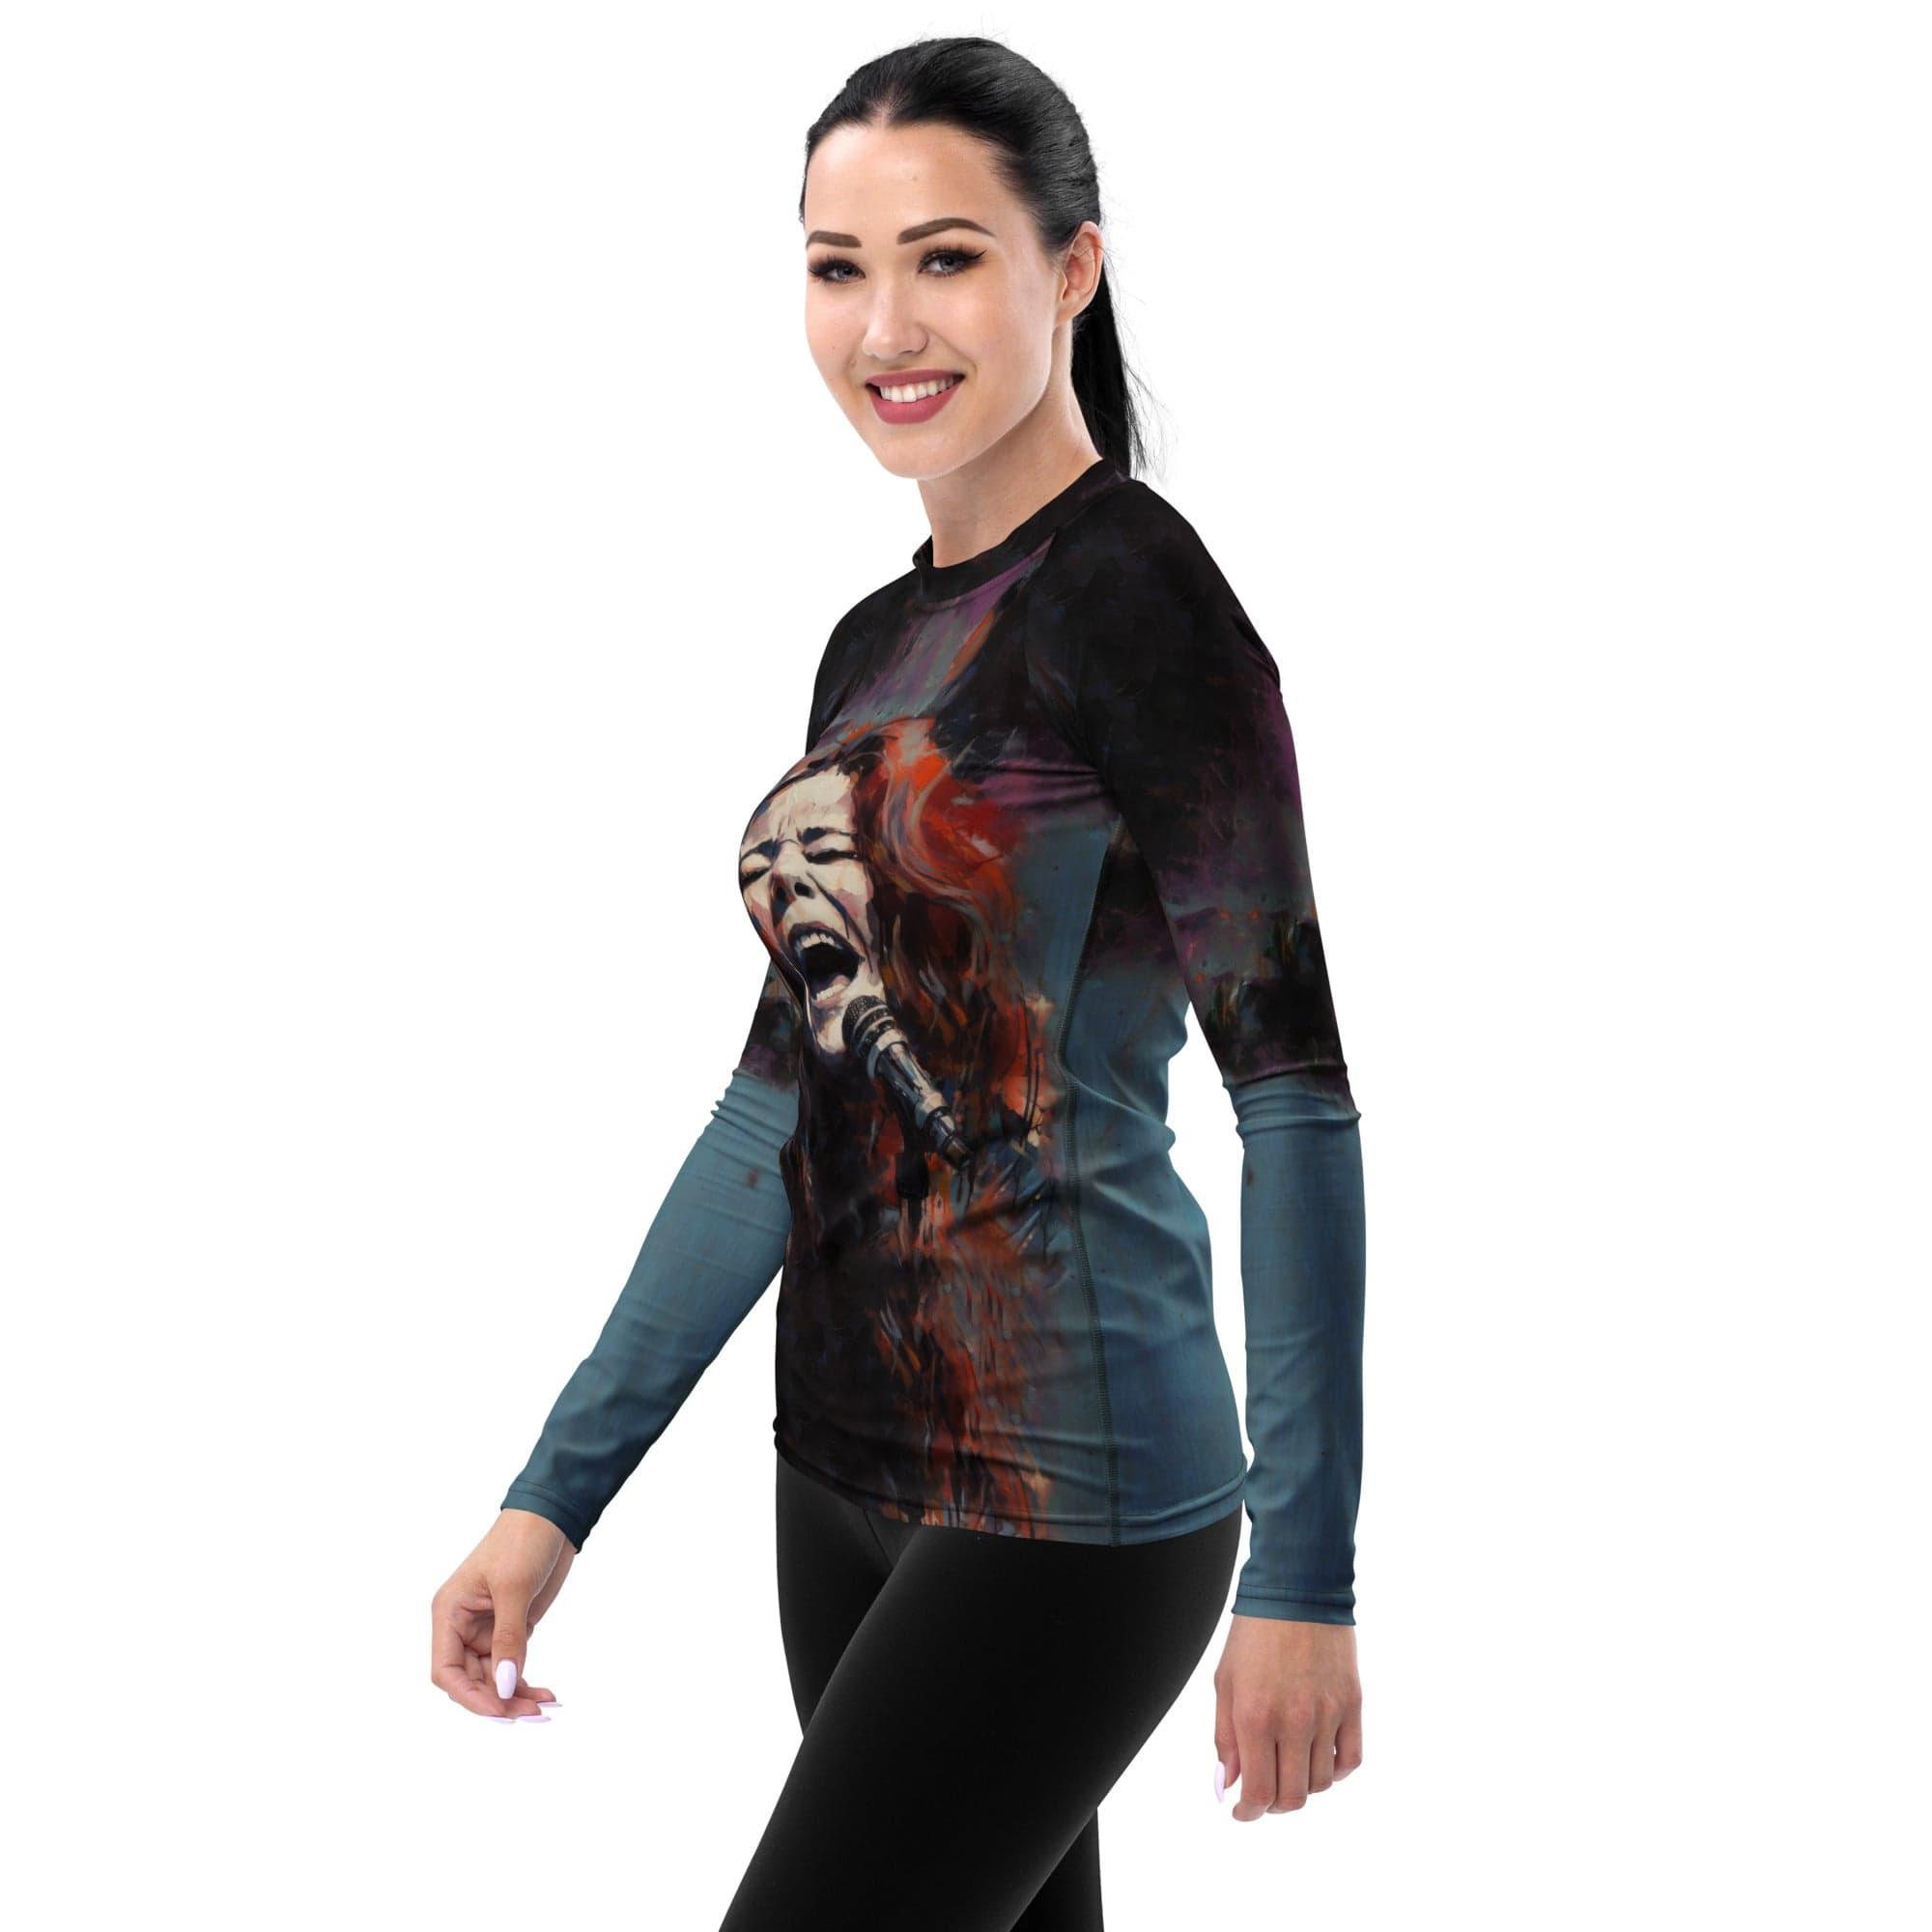 Close-up of the high-quality material of Vibrant Visions Women's Rash Guard